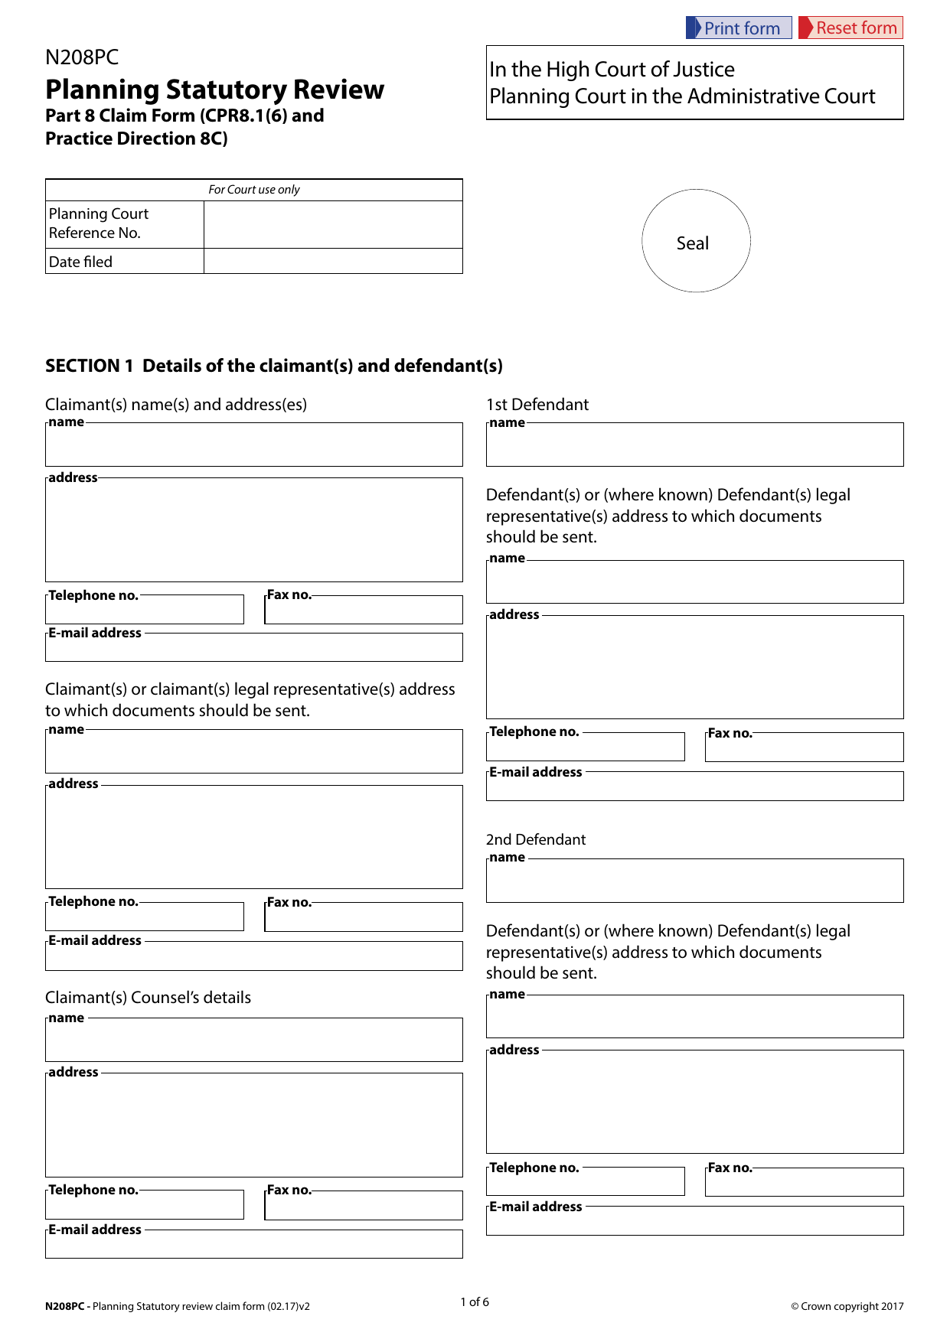 Form N208PC Planning Statutory Review - Part 8 Claim Form (Cpr8.1(6) and Practice Direction 8c) - United Kingdom, Page 1